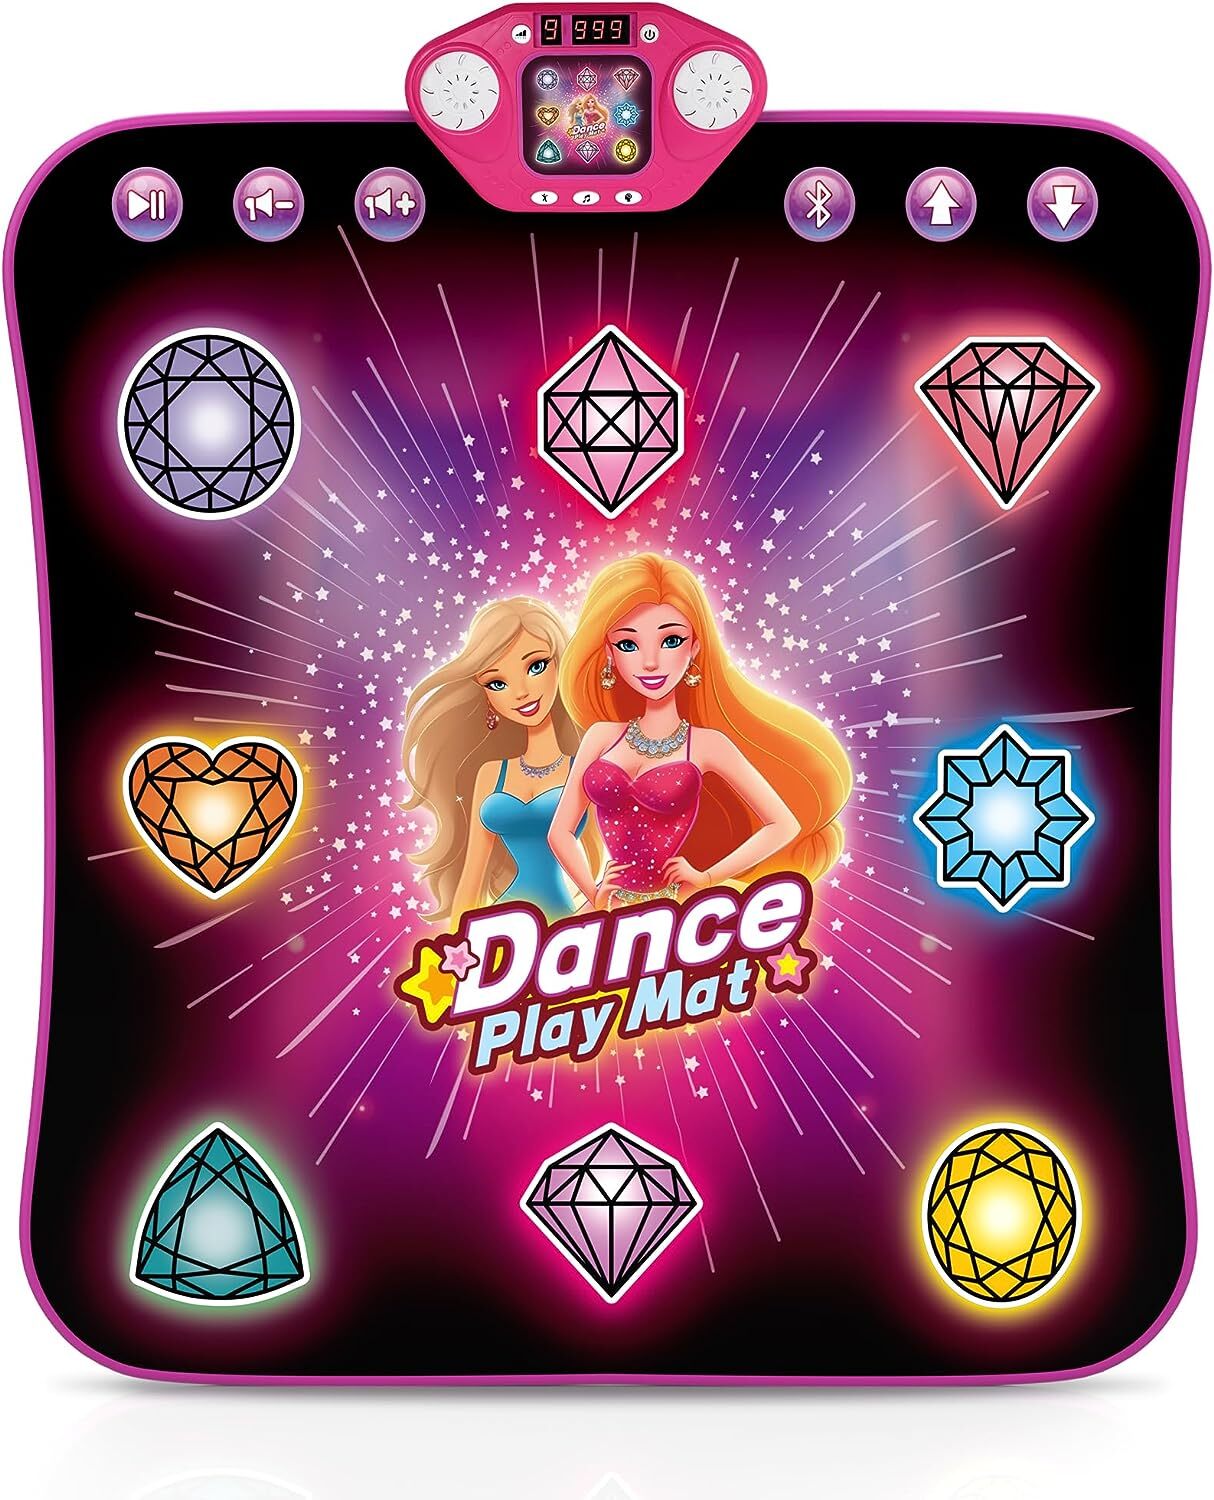 8 Buttons Light Up Dancing Mat 6 Game Modes with Bluetooth & Built-in 9 Songs Dance Pad -Dance Mat for Kids Age 4-12 -Musical Dance Mat Toy for 4-12 Year Old Girls Boys